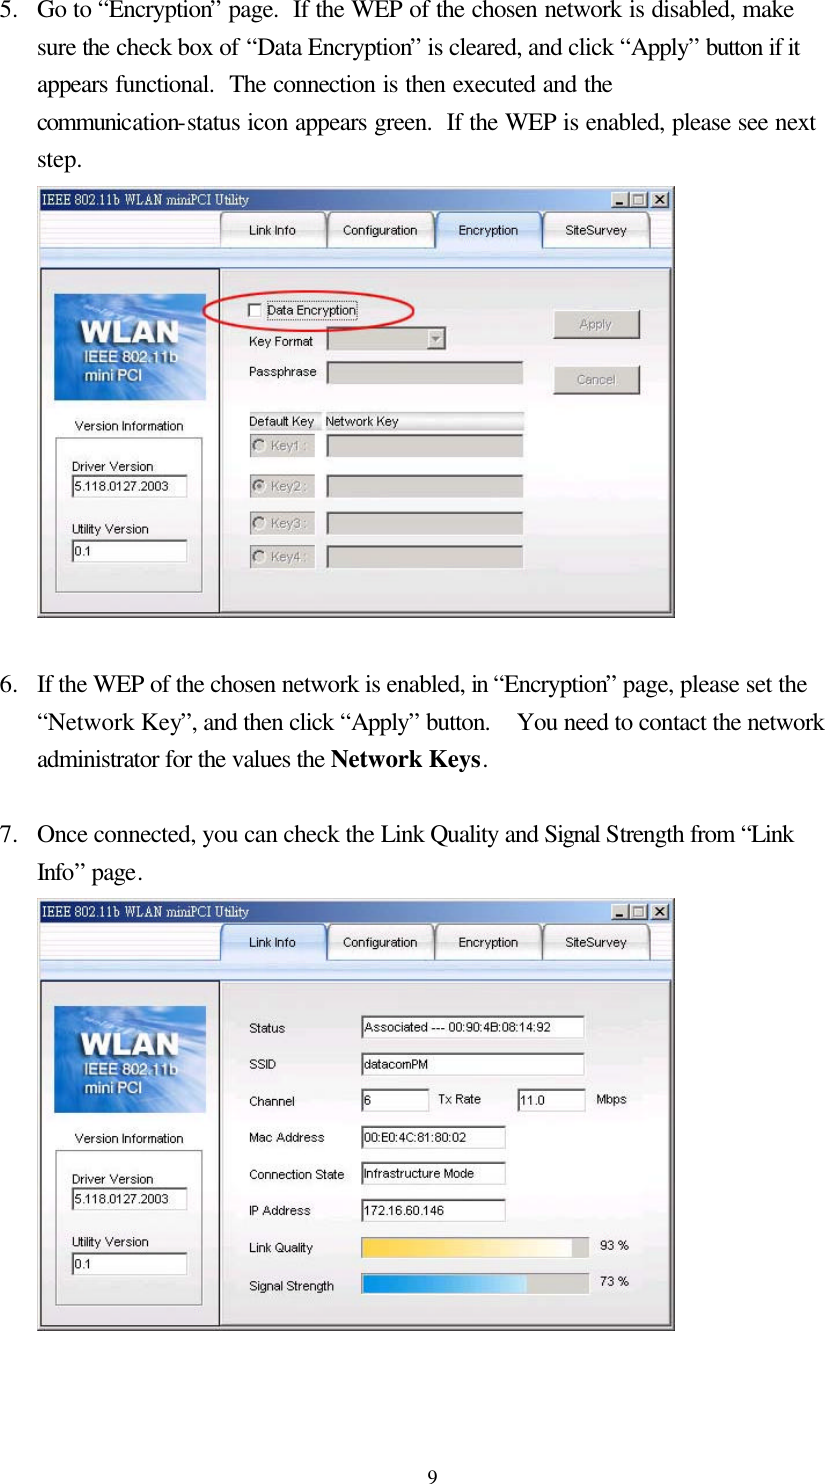  95.  Go to “Encryption” page.  If the WEP of the chosen network is disabled, make sure the check box of “Data Encryption” is cleared, and click “Apply” button if it appears functional.  The connection is then executed and the communication-status icon appears green.  If the WEP is enabled, please see next step.   6.  If the WEP of the chosen network is enabled, in “Encryption” page, please set the “Network Key”, and then click “Apply” button.  You need to contact the network administrator for the values the Network Keys.  7.  Once connected, you can check the Link Quality and Signal Strength from “Link Info” page.    